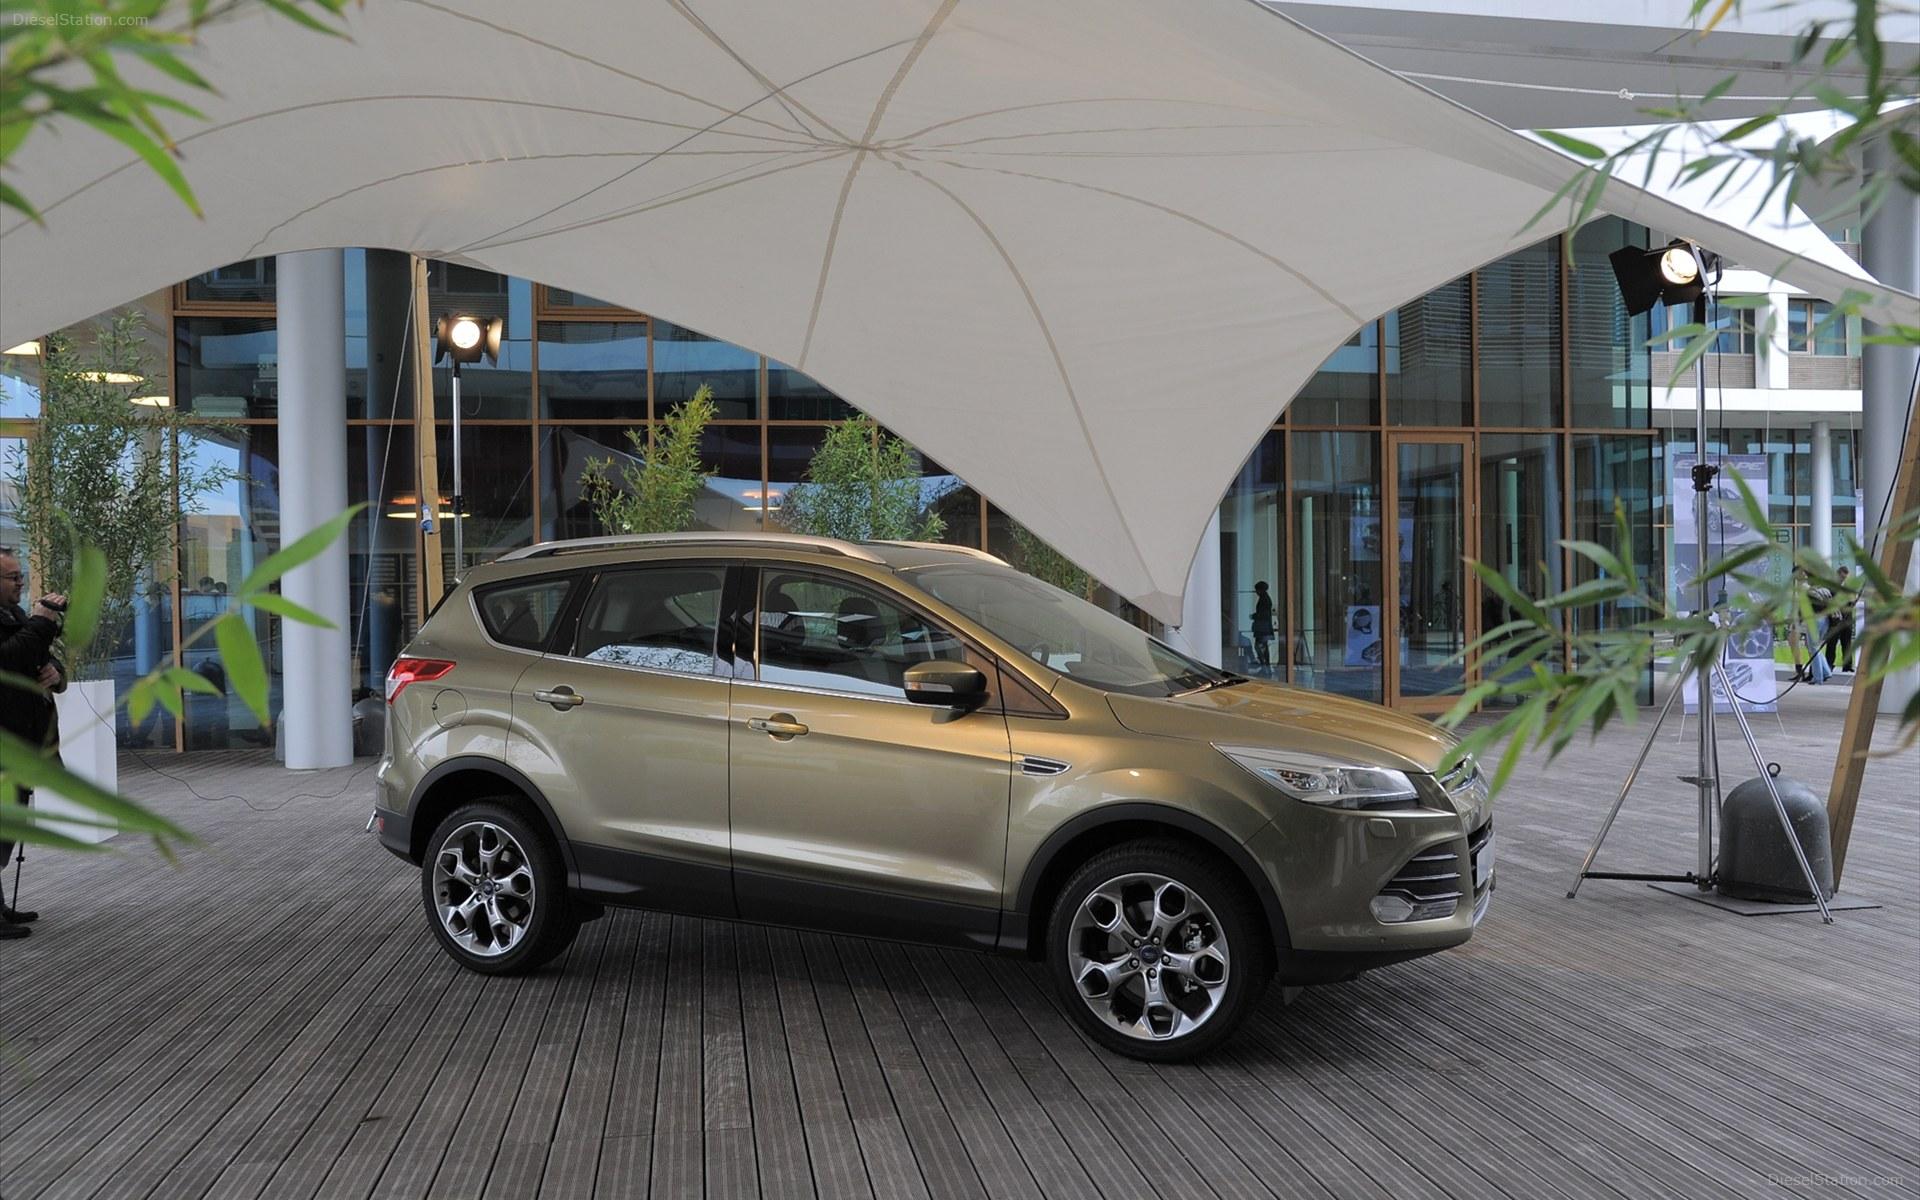 Ford Kuga 2012 Widescreen Exotic Car Wallpaper of 8, Diesel Station